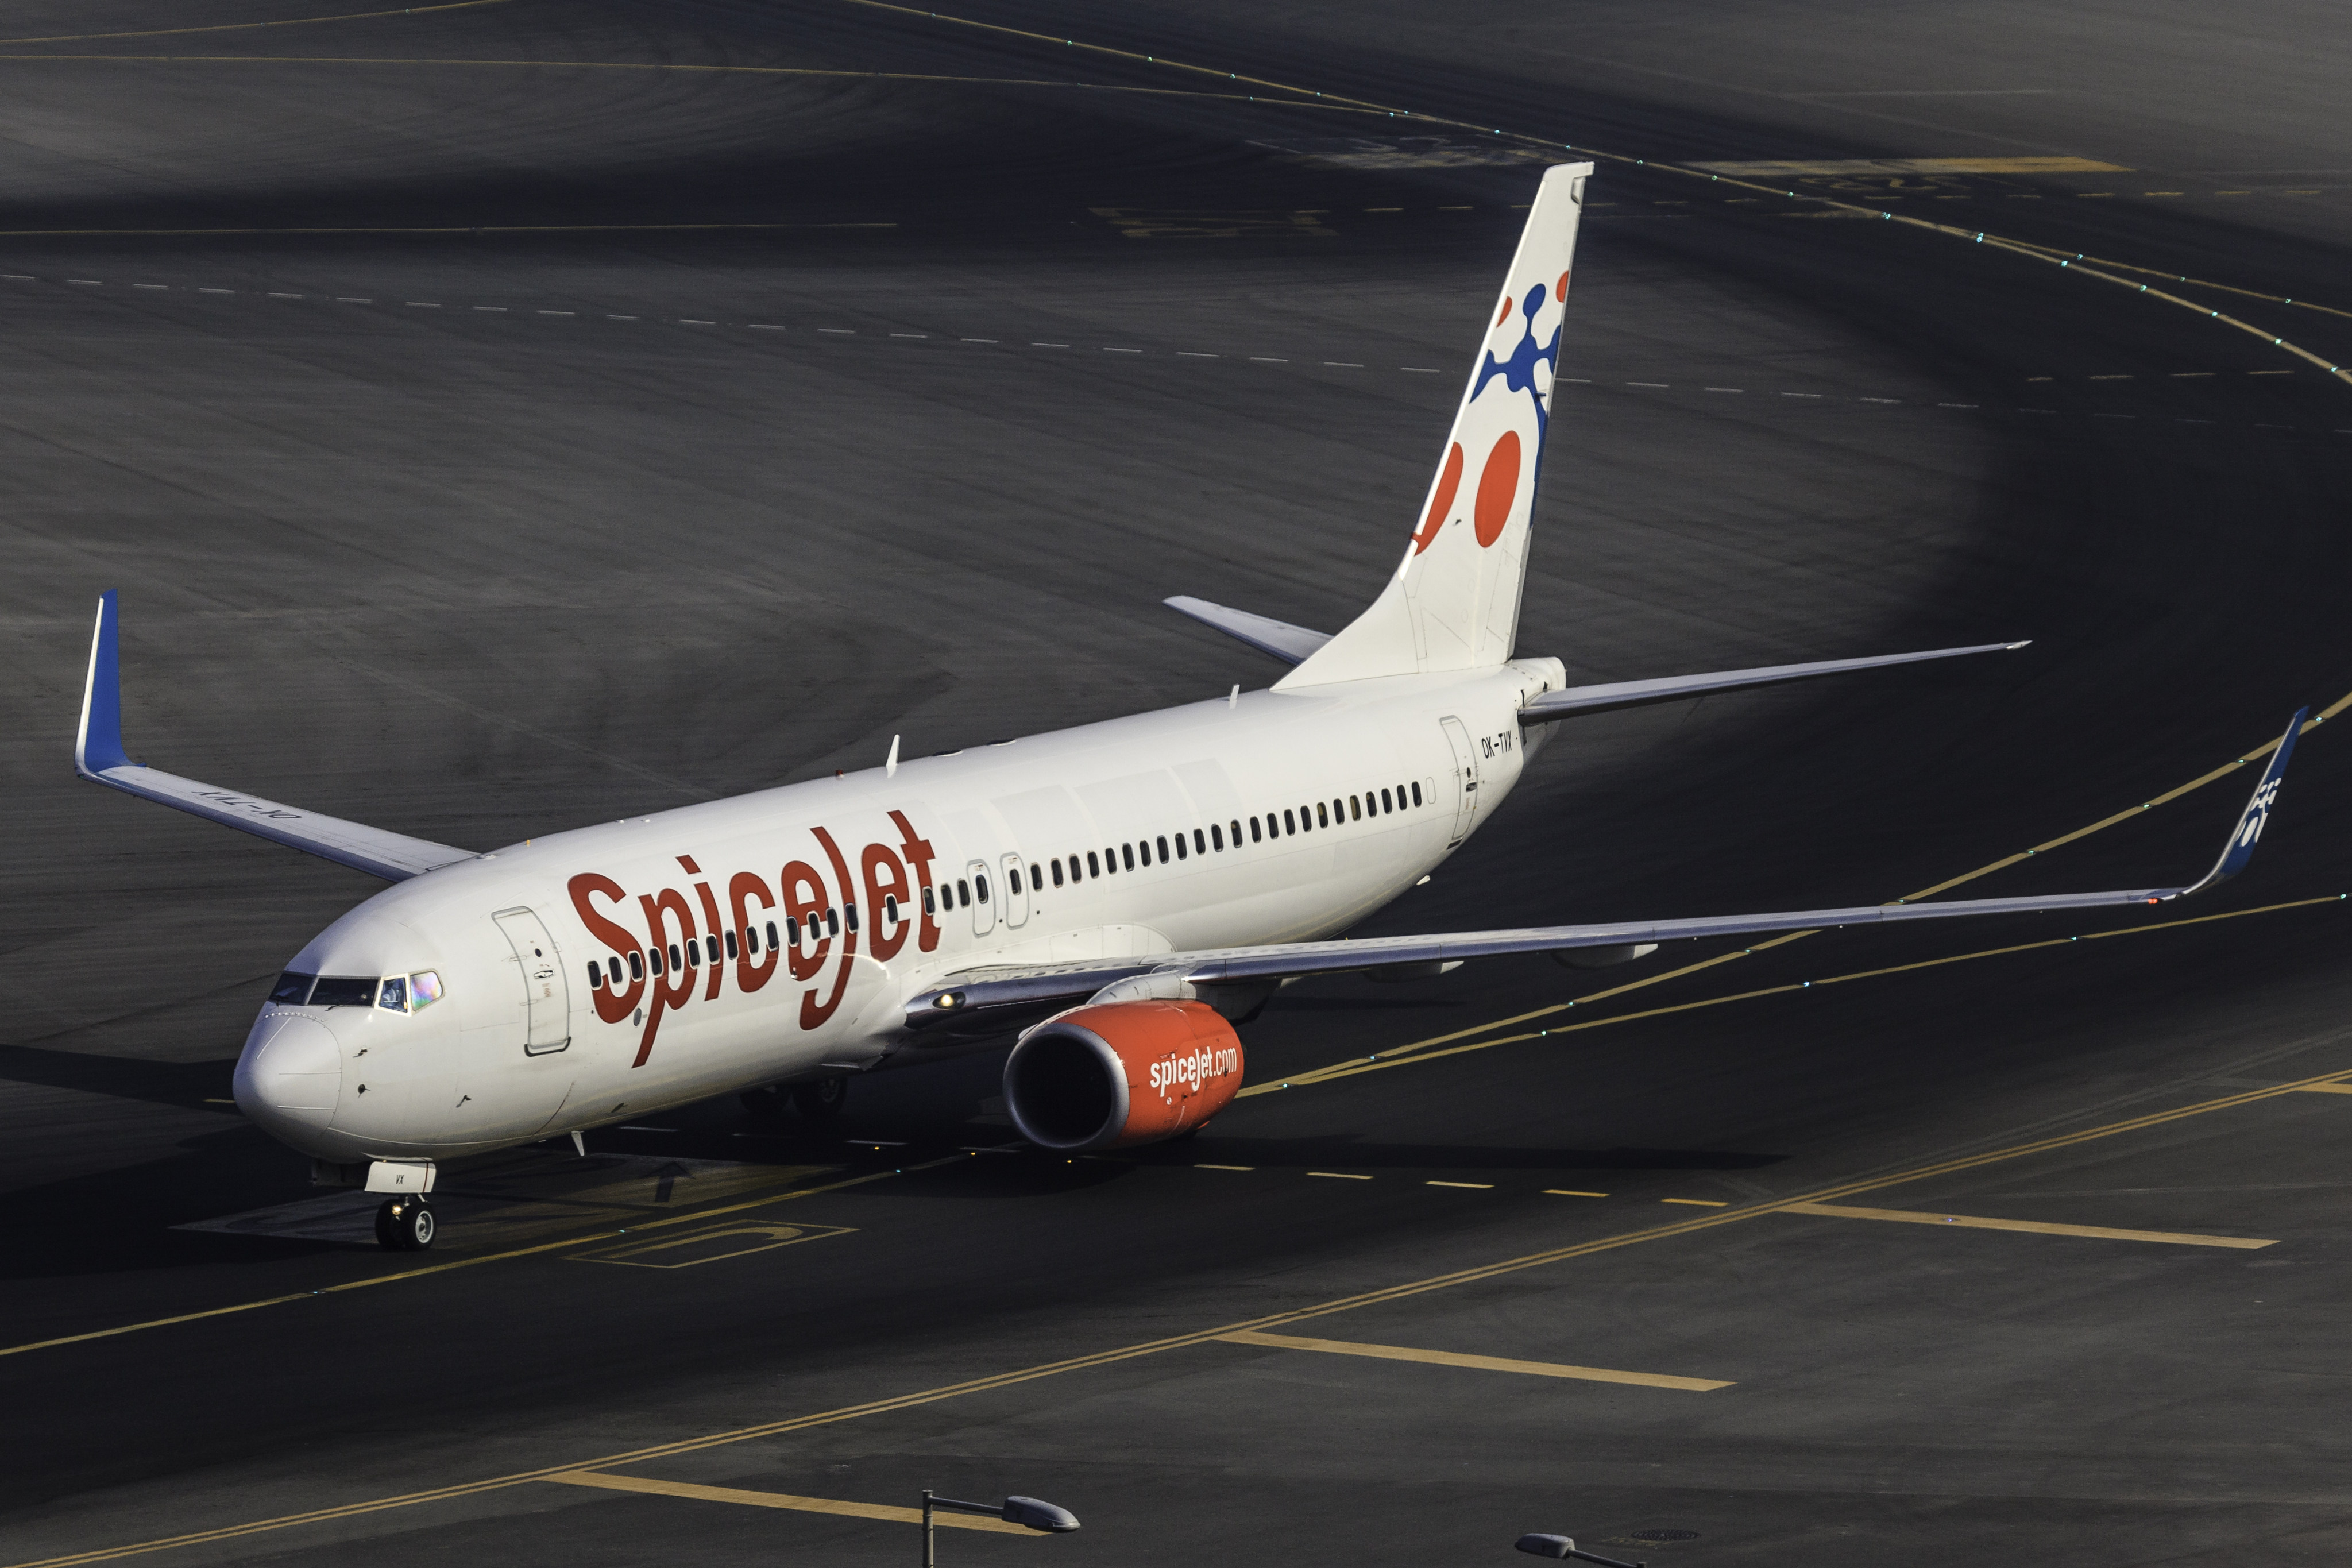 A Indian passenger on a SpiceJet flight from Mumbai to Bangalore was locked in the plane bathroom. Photo: Shutterstock